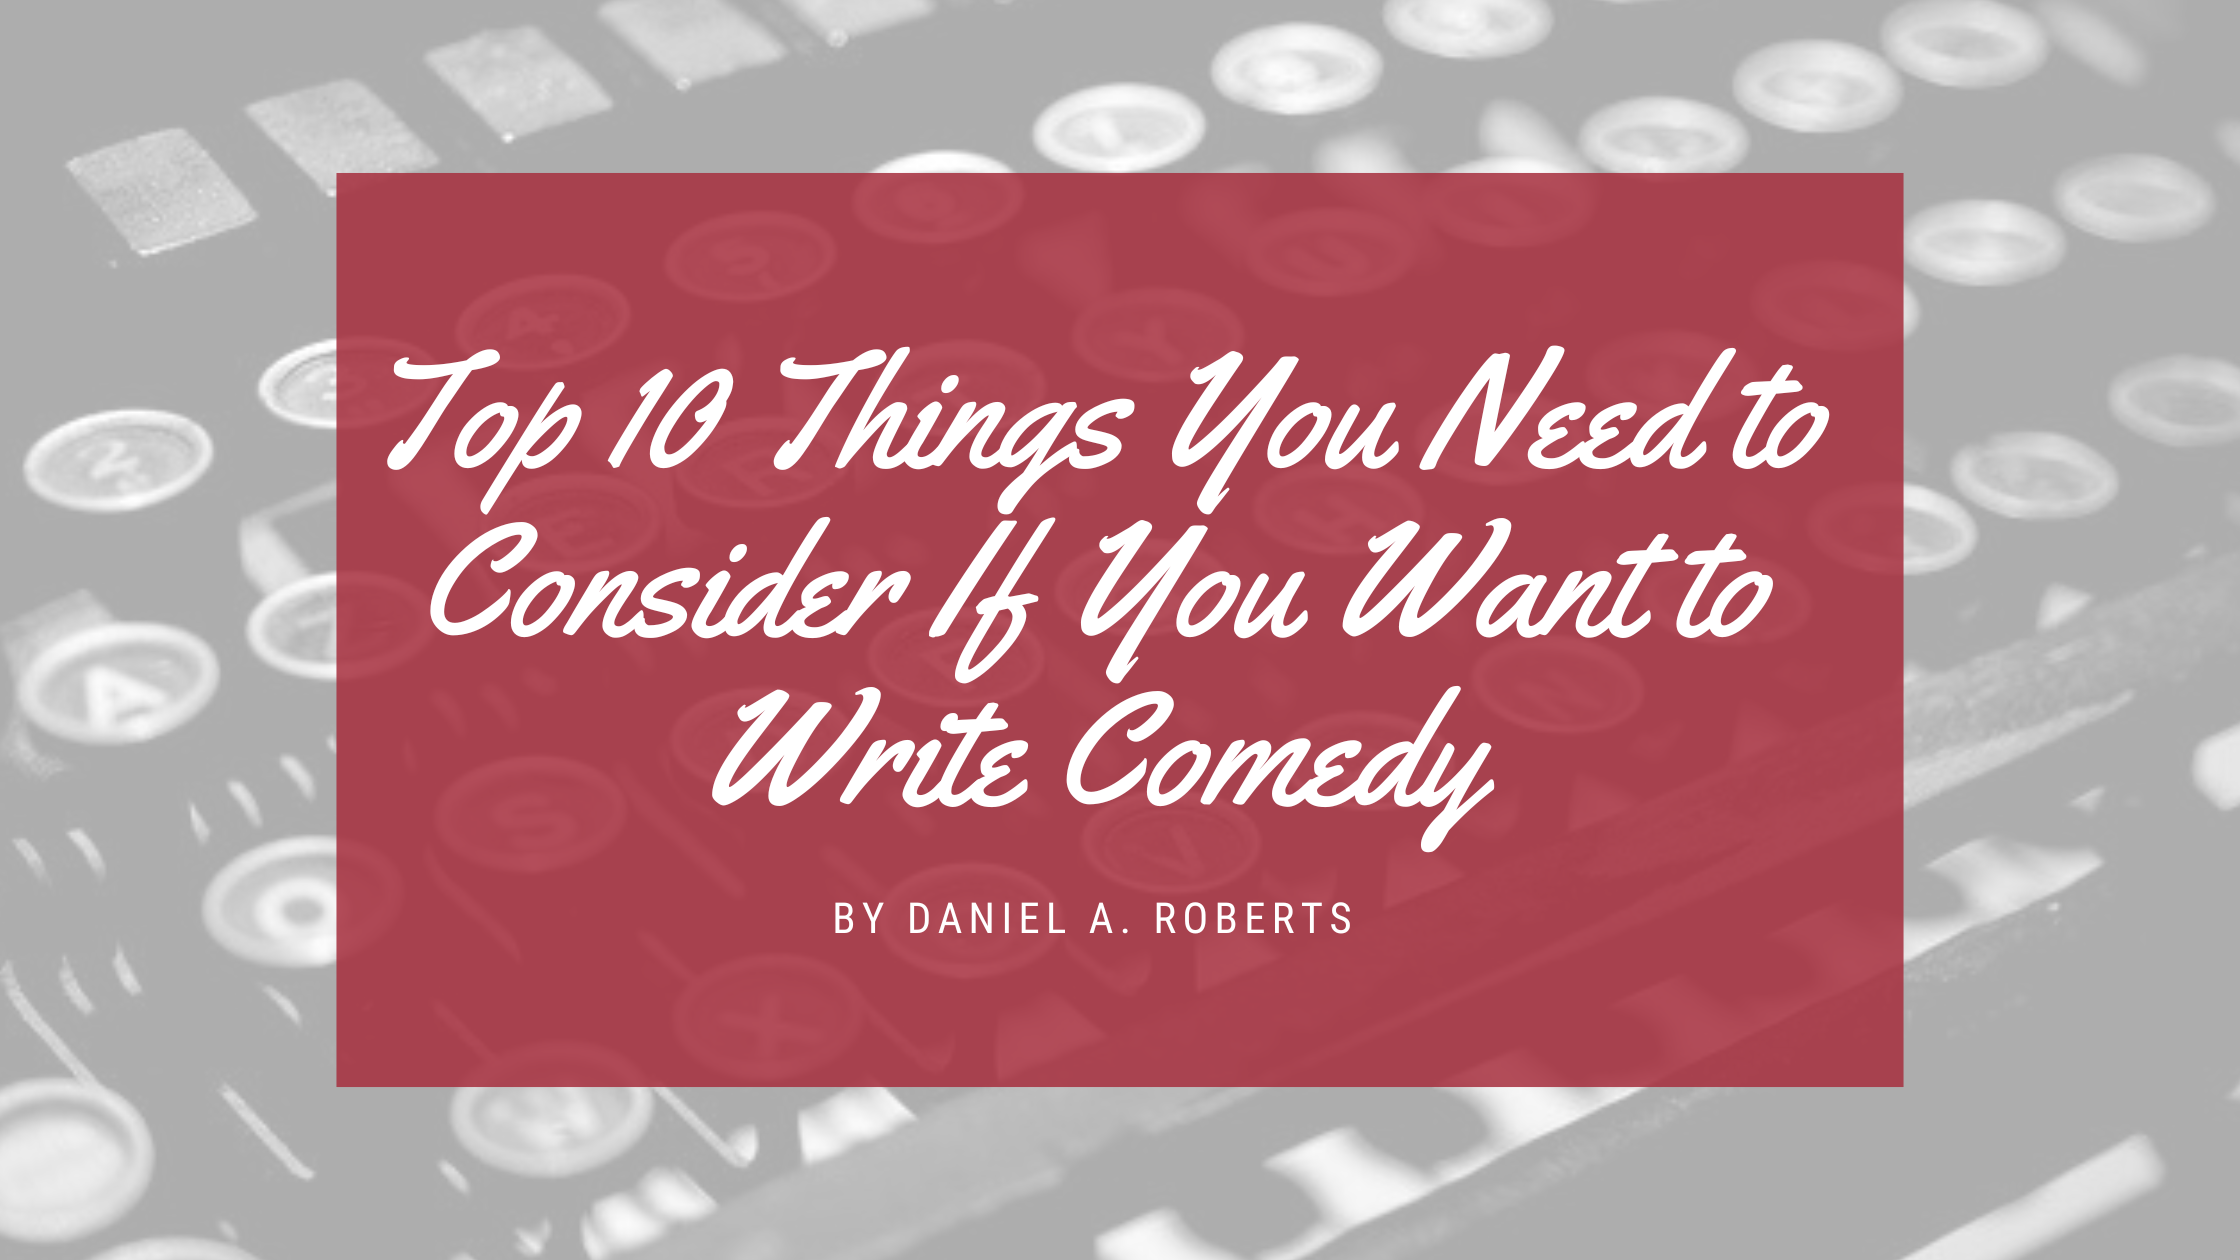 Top 10 Things You Need to Consider If You Want to Write Comedy